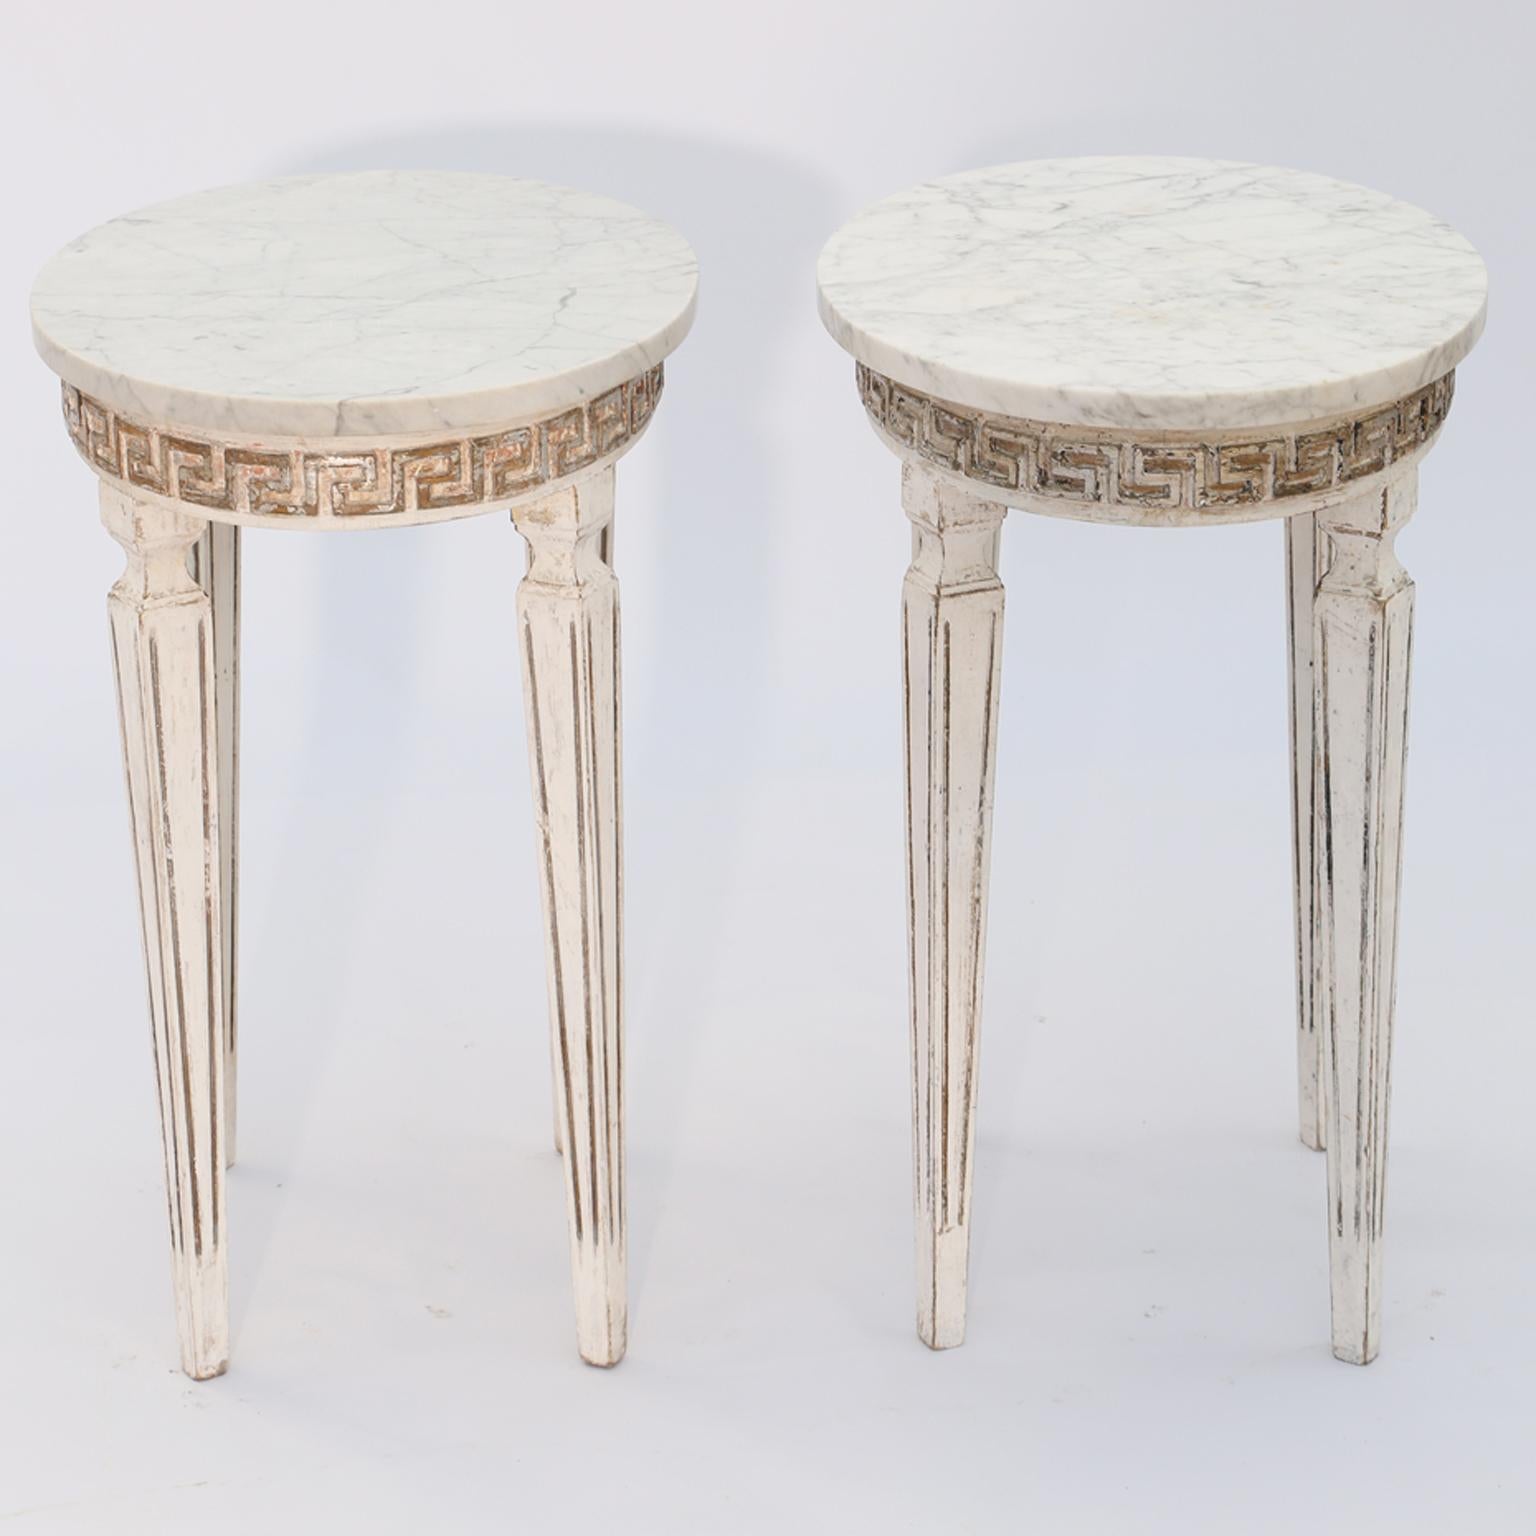 Pair of Marble-Top Italian Accent Tables with Greek Key Apron 1